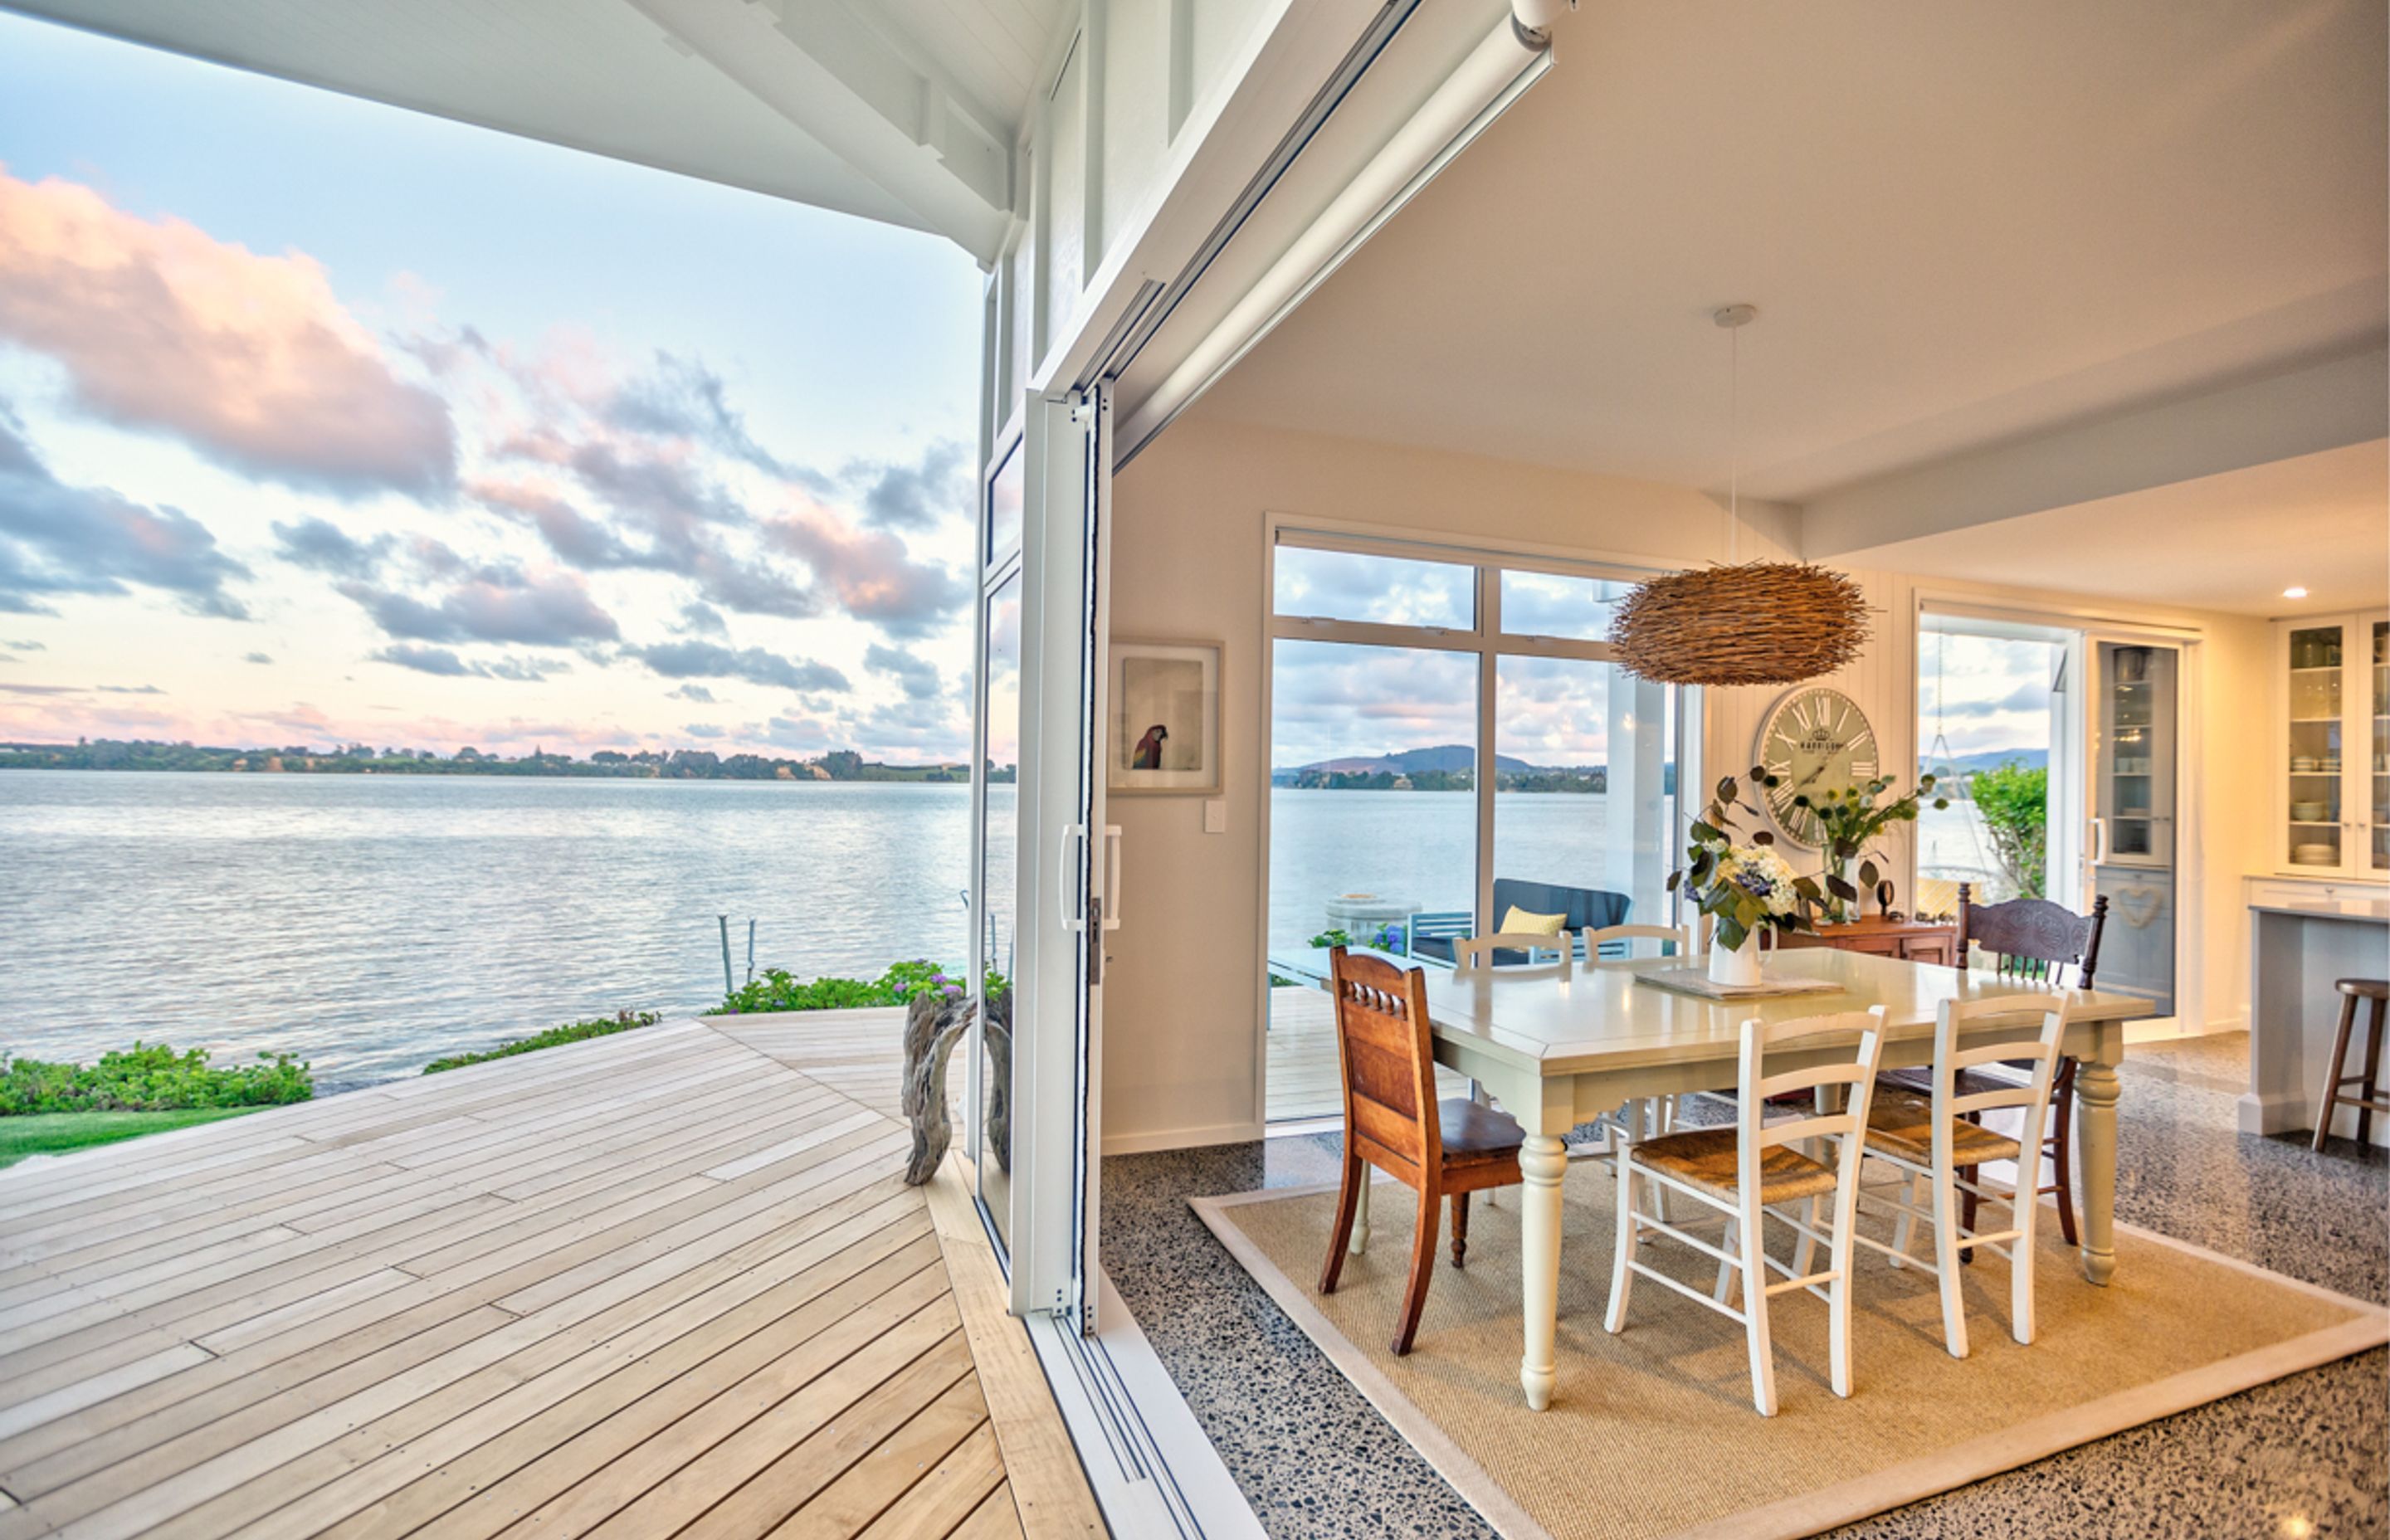 Nestled on the harbours edge this home has uninterrupted views from all of the main living spaces and master suite. 